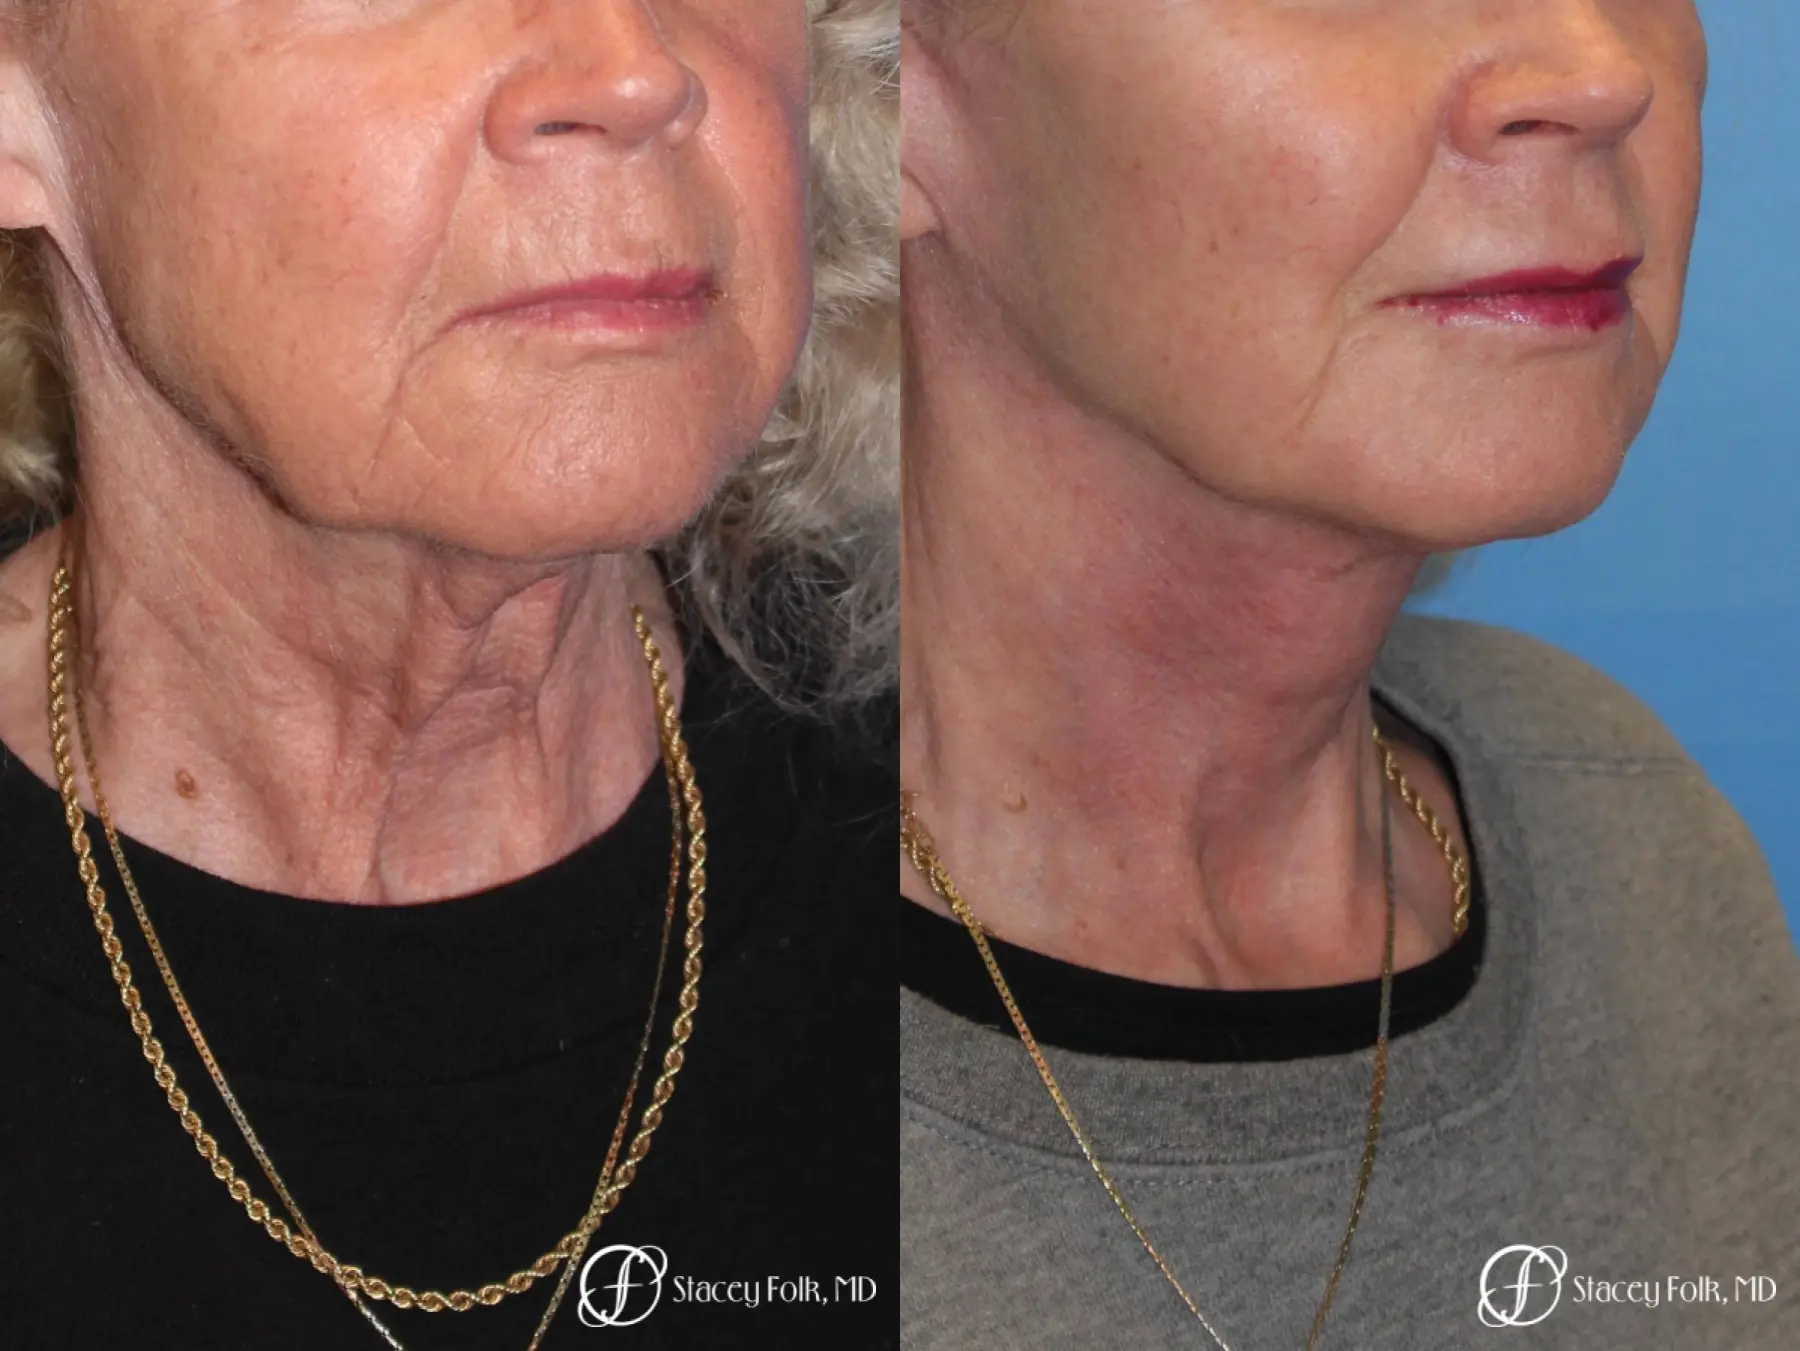 Denver Facial Rejuvenation Face lift, Fat Injections, and Laser Resurfacing 7131 - Before and After 4